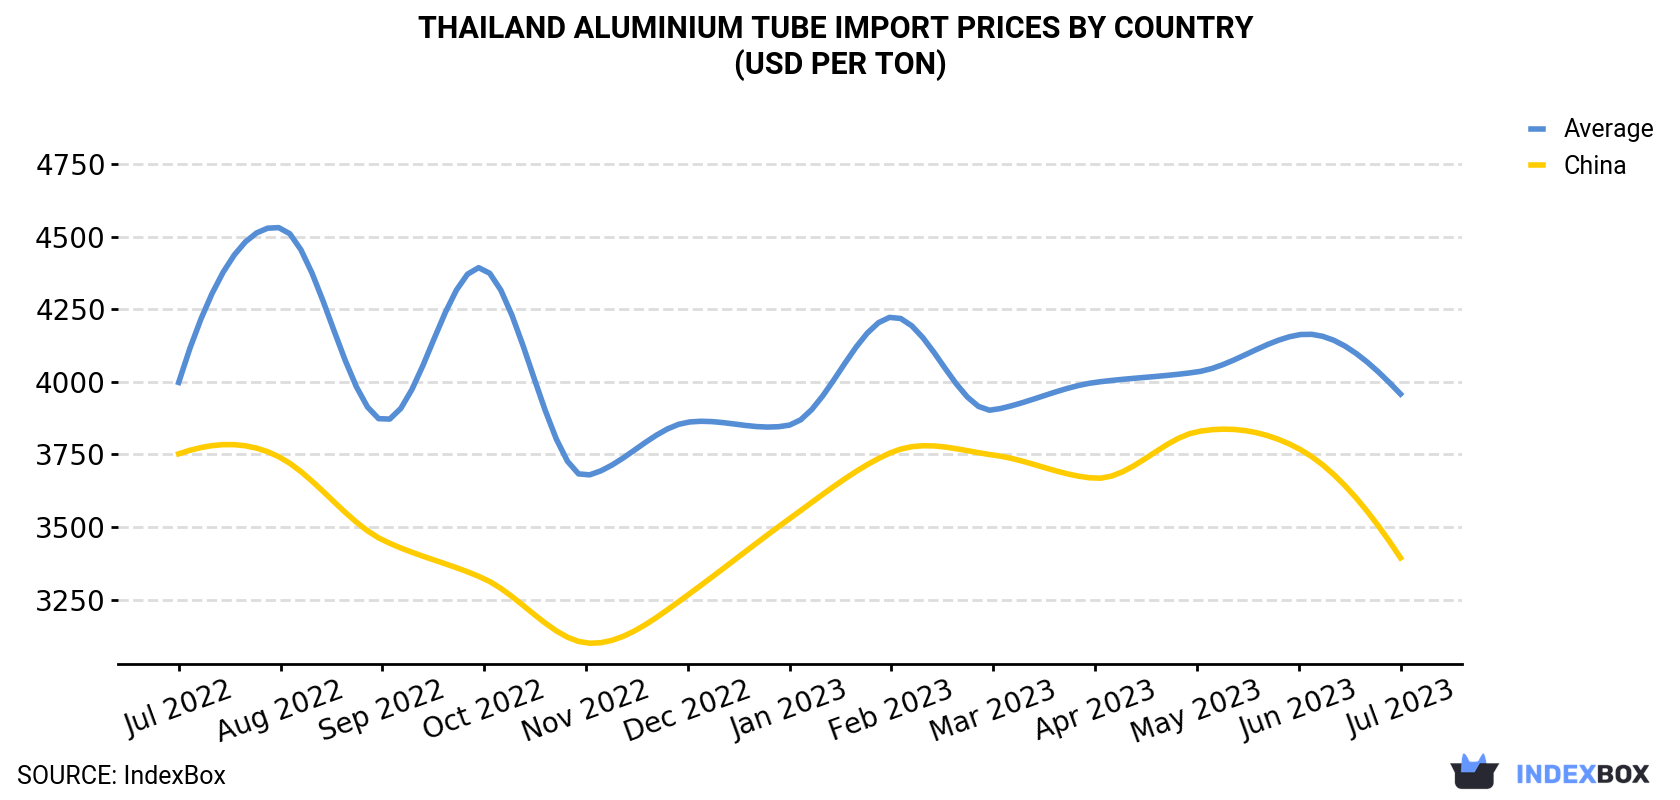 Thailand Aluminium Tube Import Prices By Country (USD Per Ton)